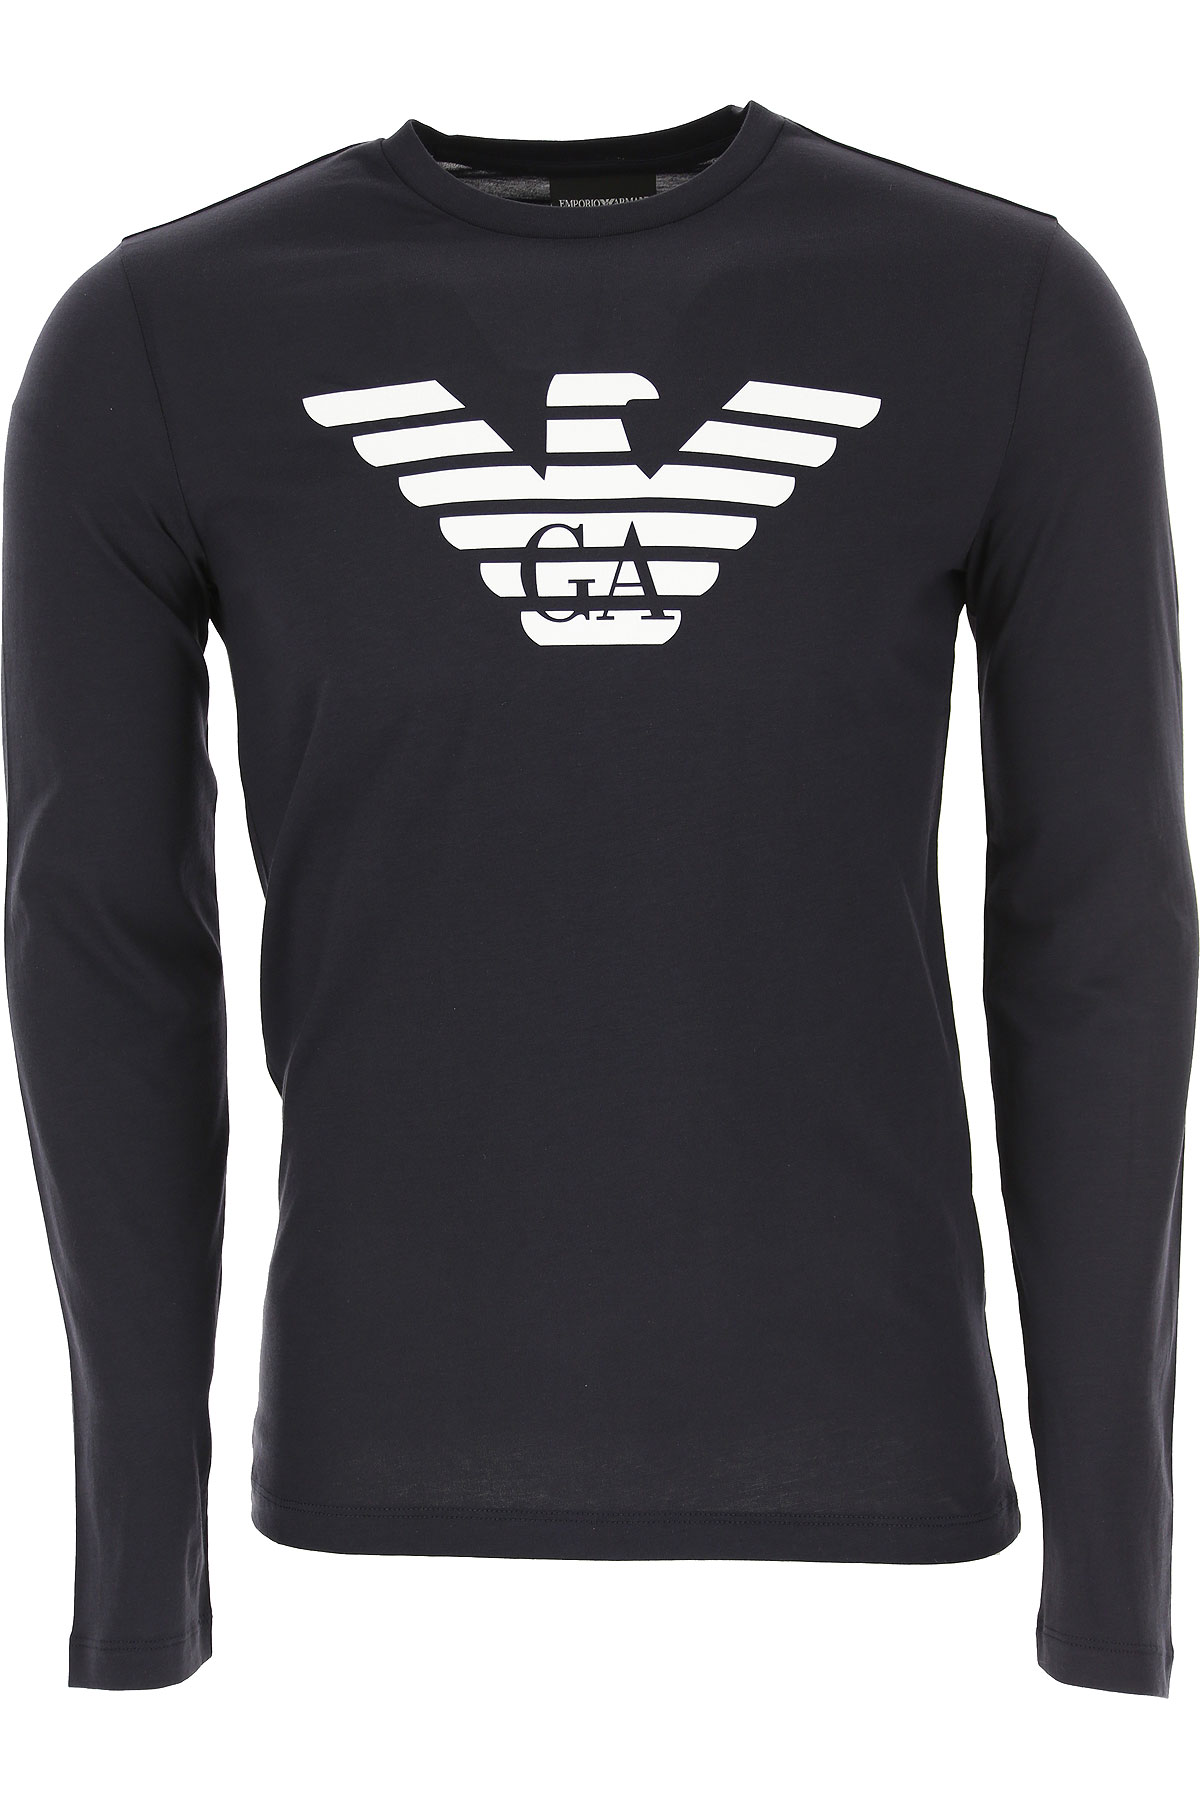 Mens Clothing Emporio Armani, Style code: 8n1t64-1jnqz-0939